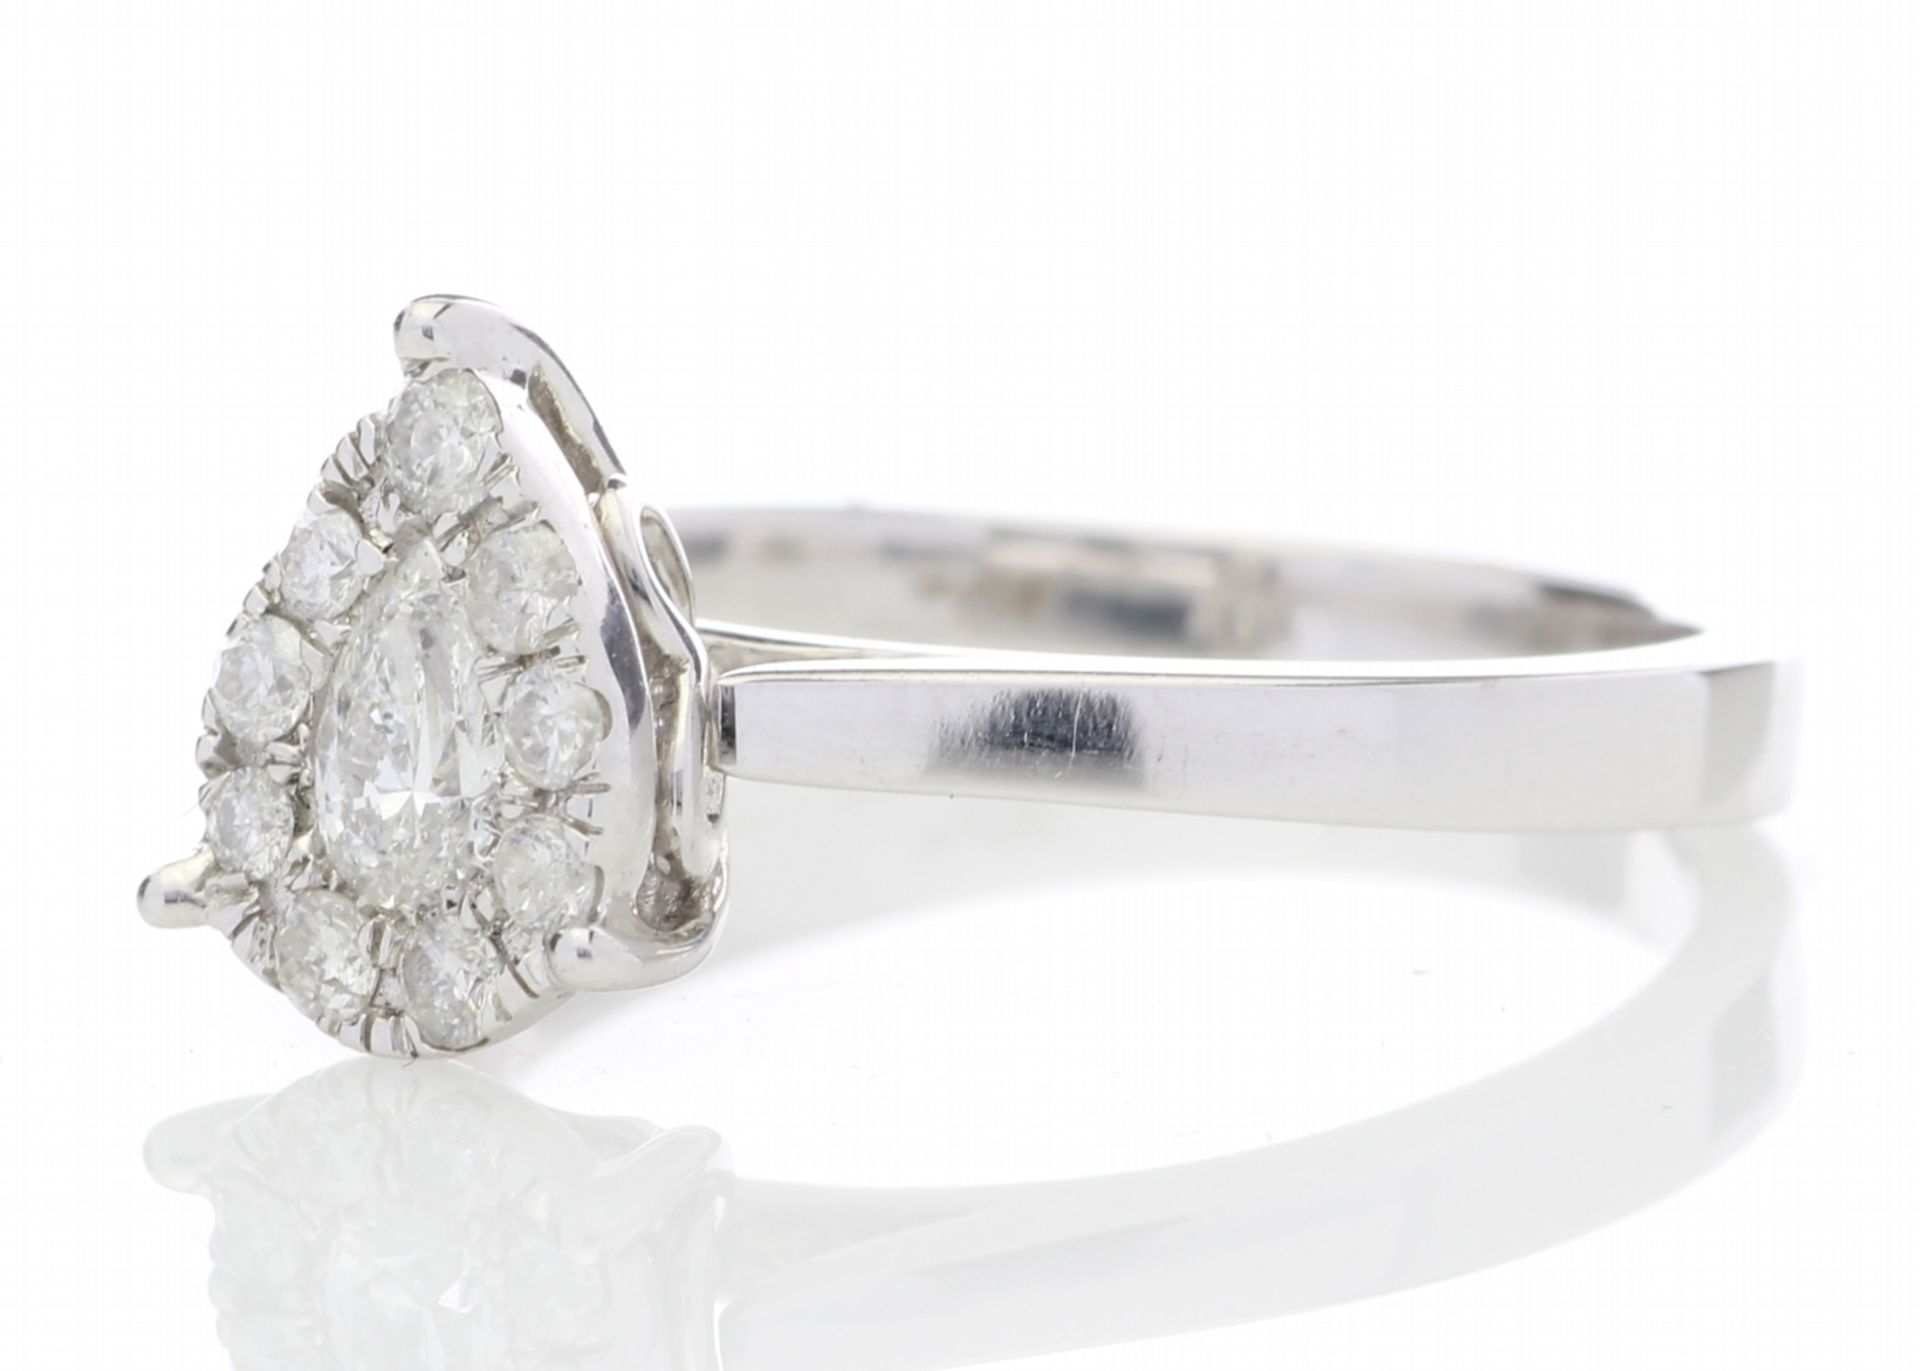 18ct White Gold Pear Cluster Diamond Ring 0.50 Carats - Valued By IDI £6,090.00 - A modern classic - Image 2 of 5